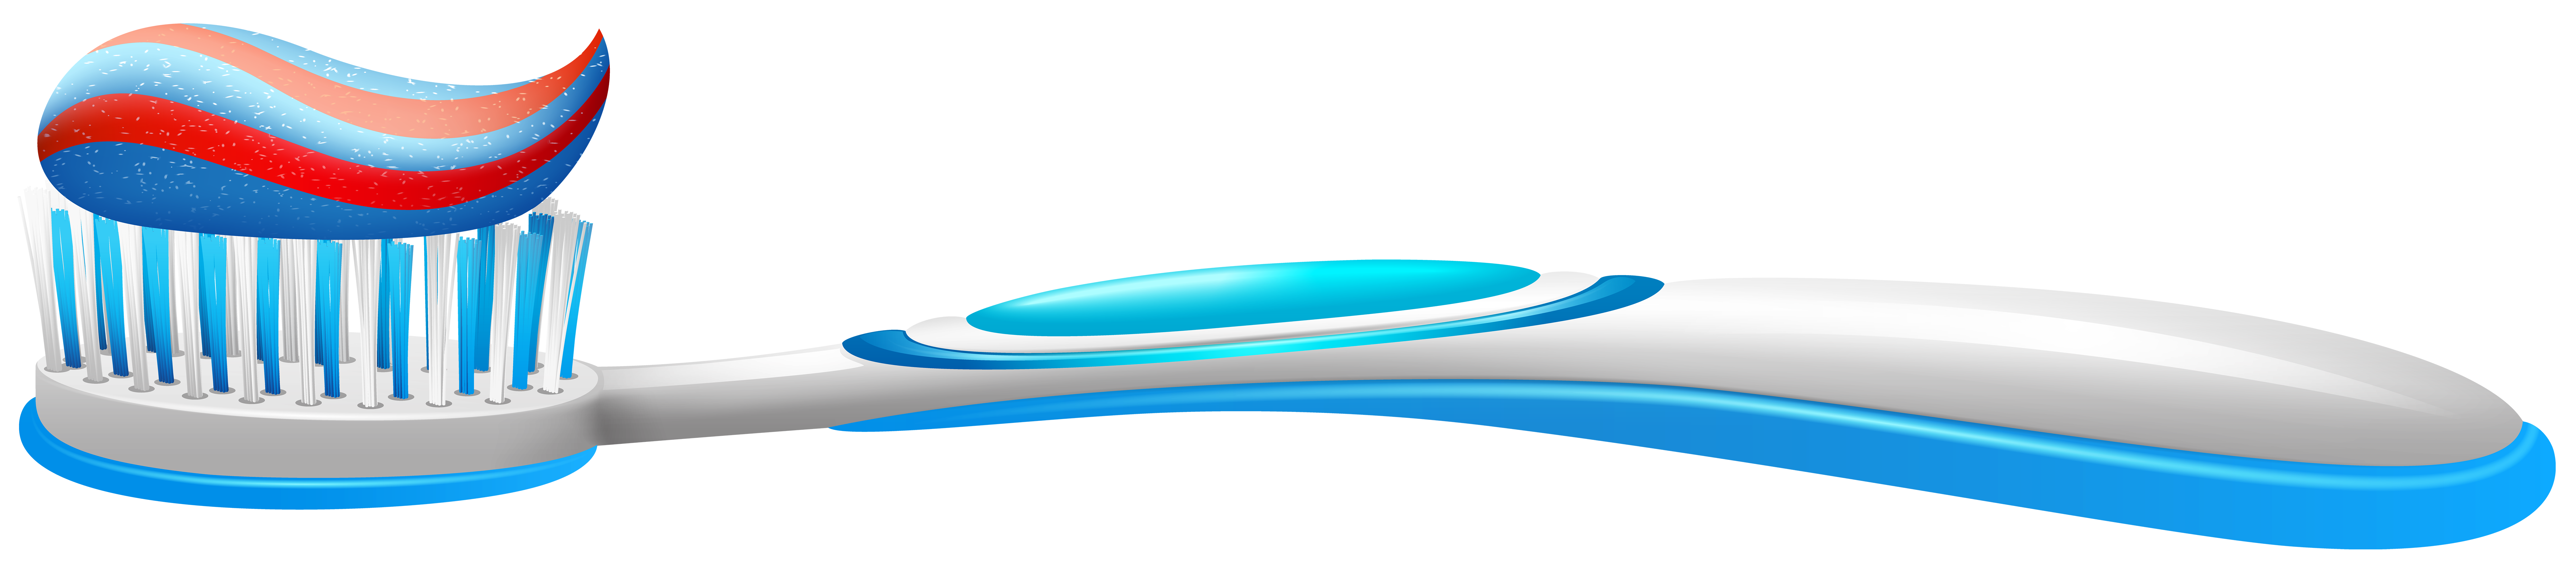 clipart toothbrush and toothpaste - photo #36